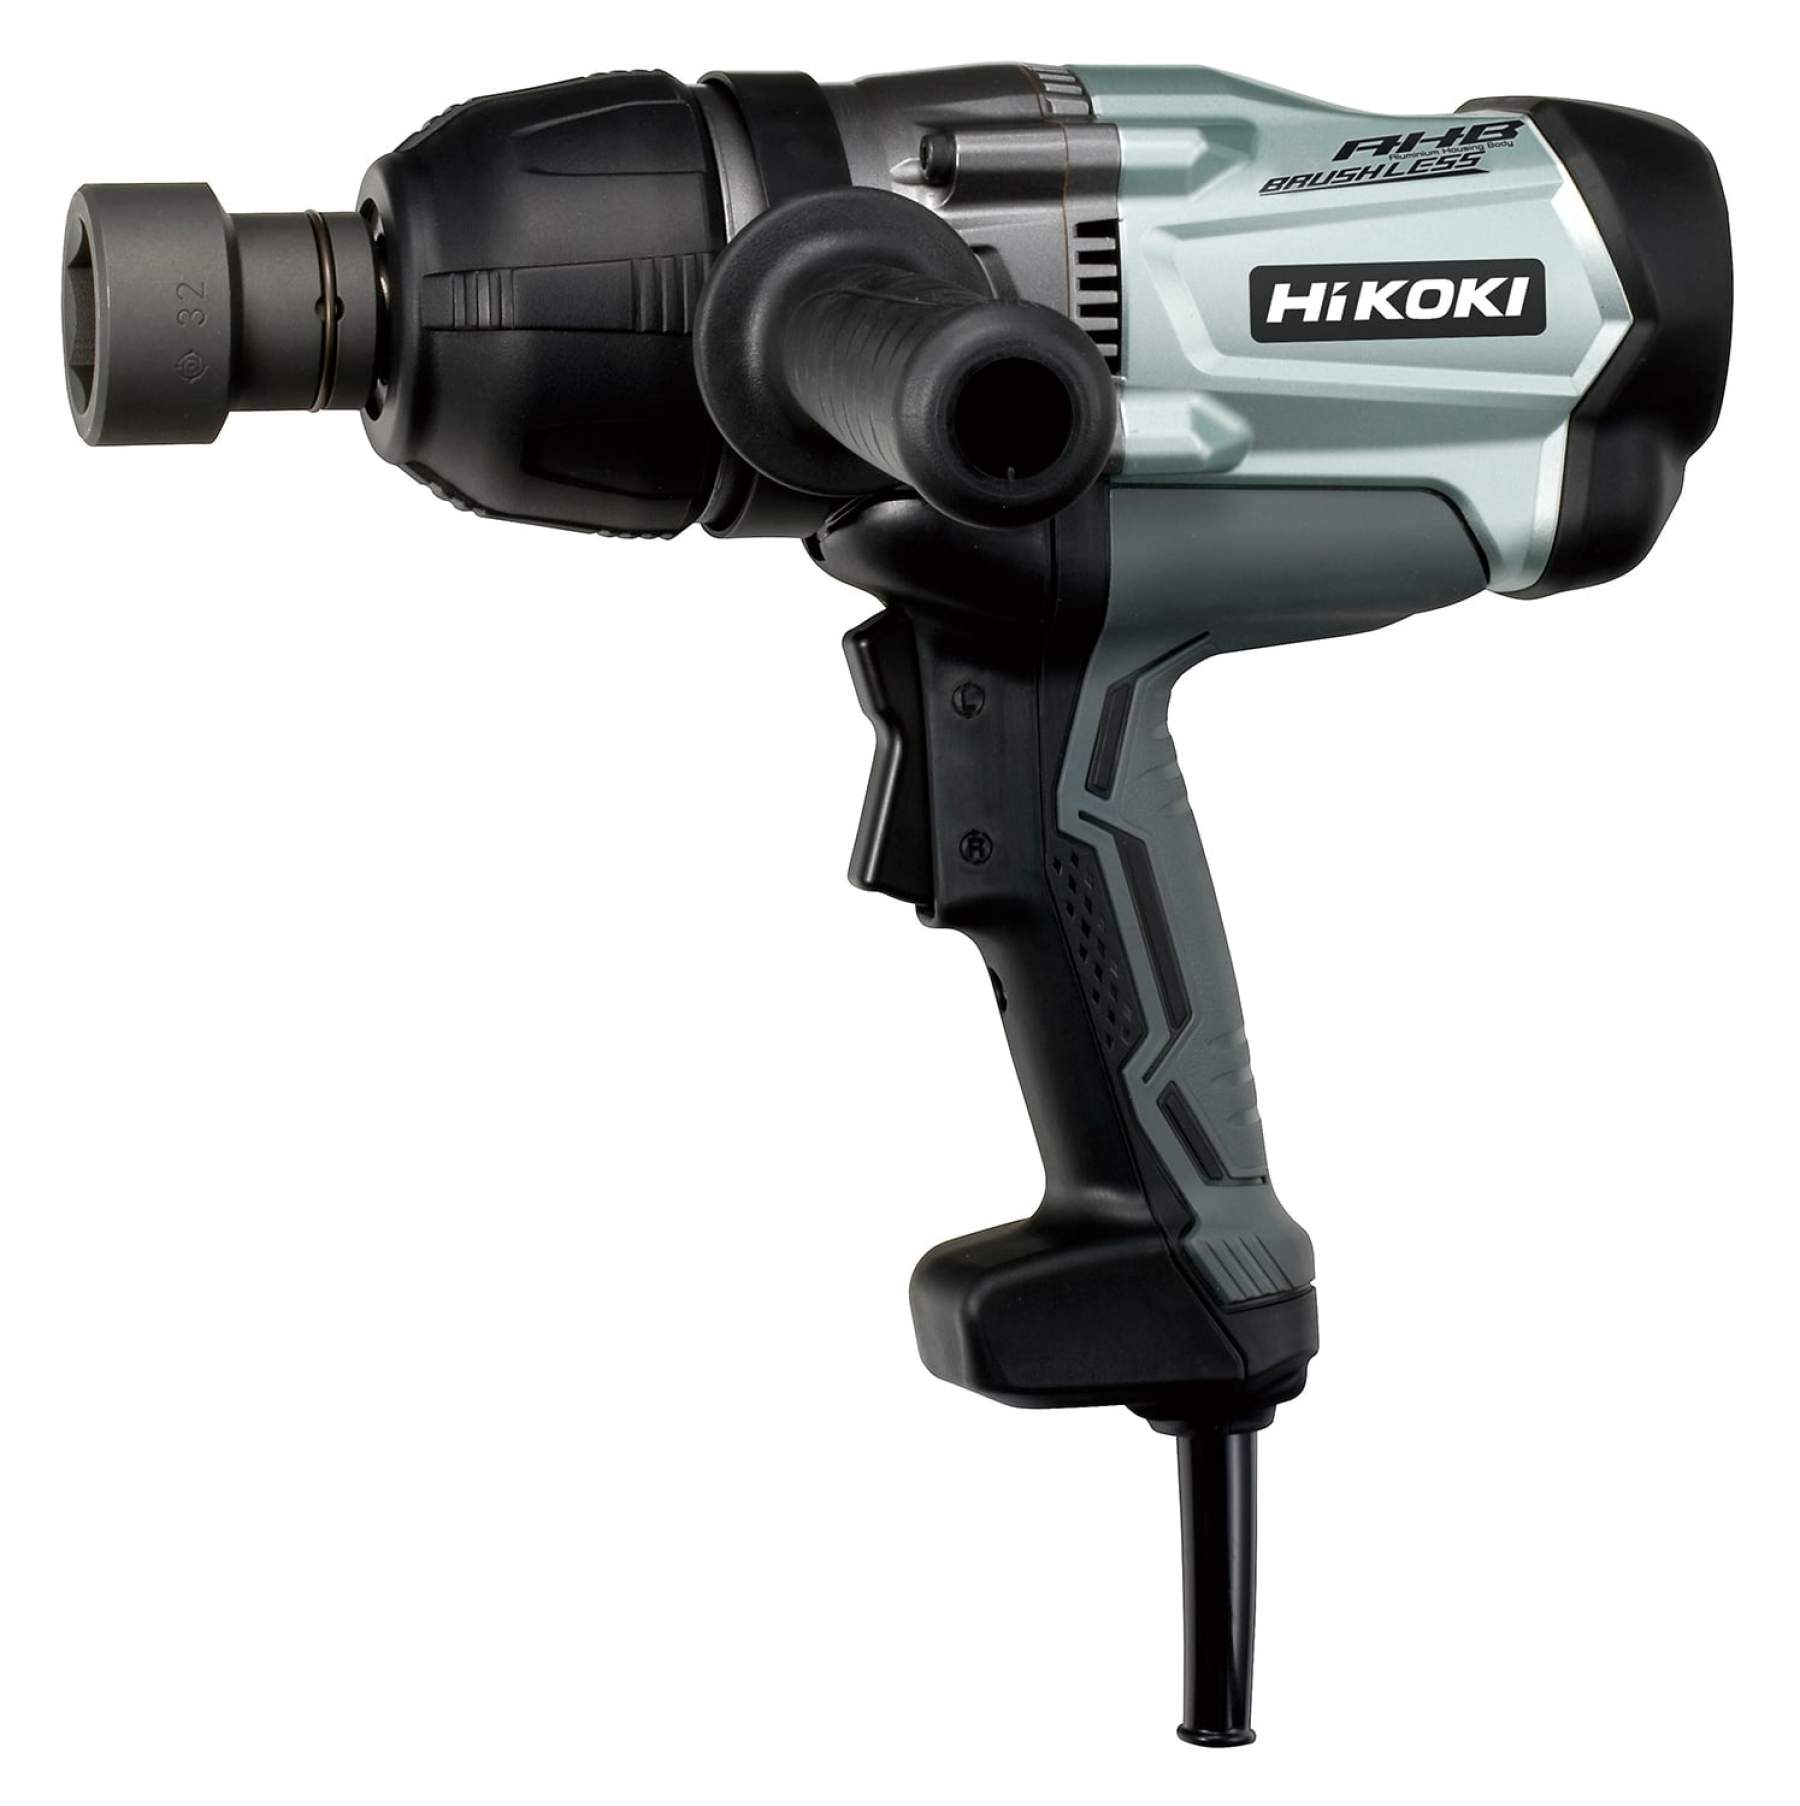 22mm Impact Wrench with Brushless Motor